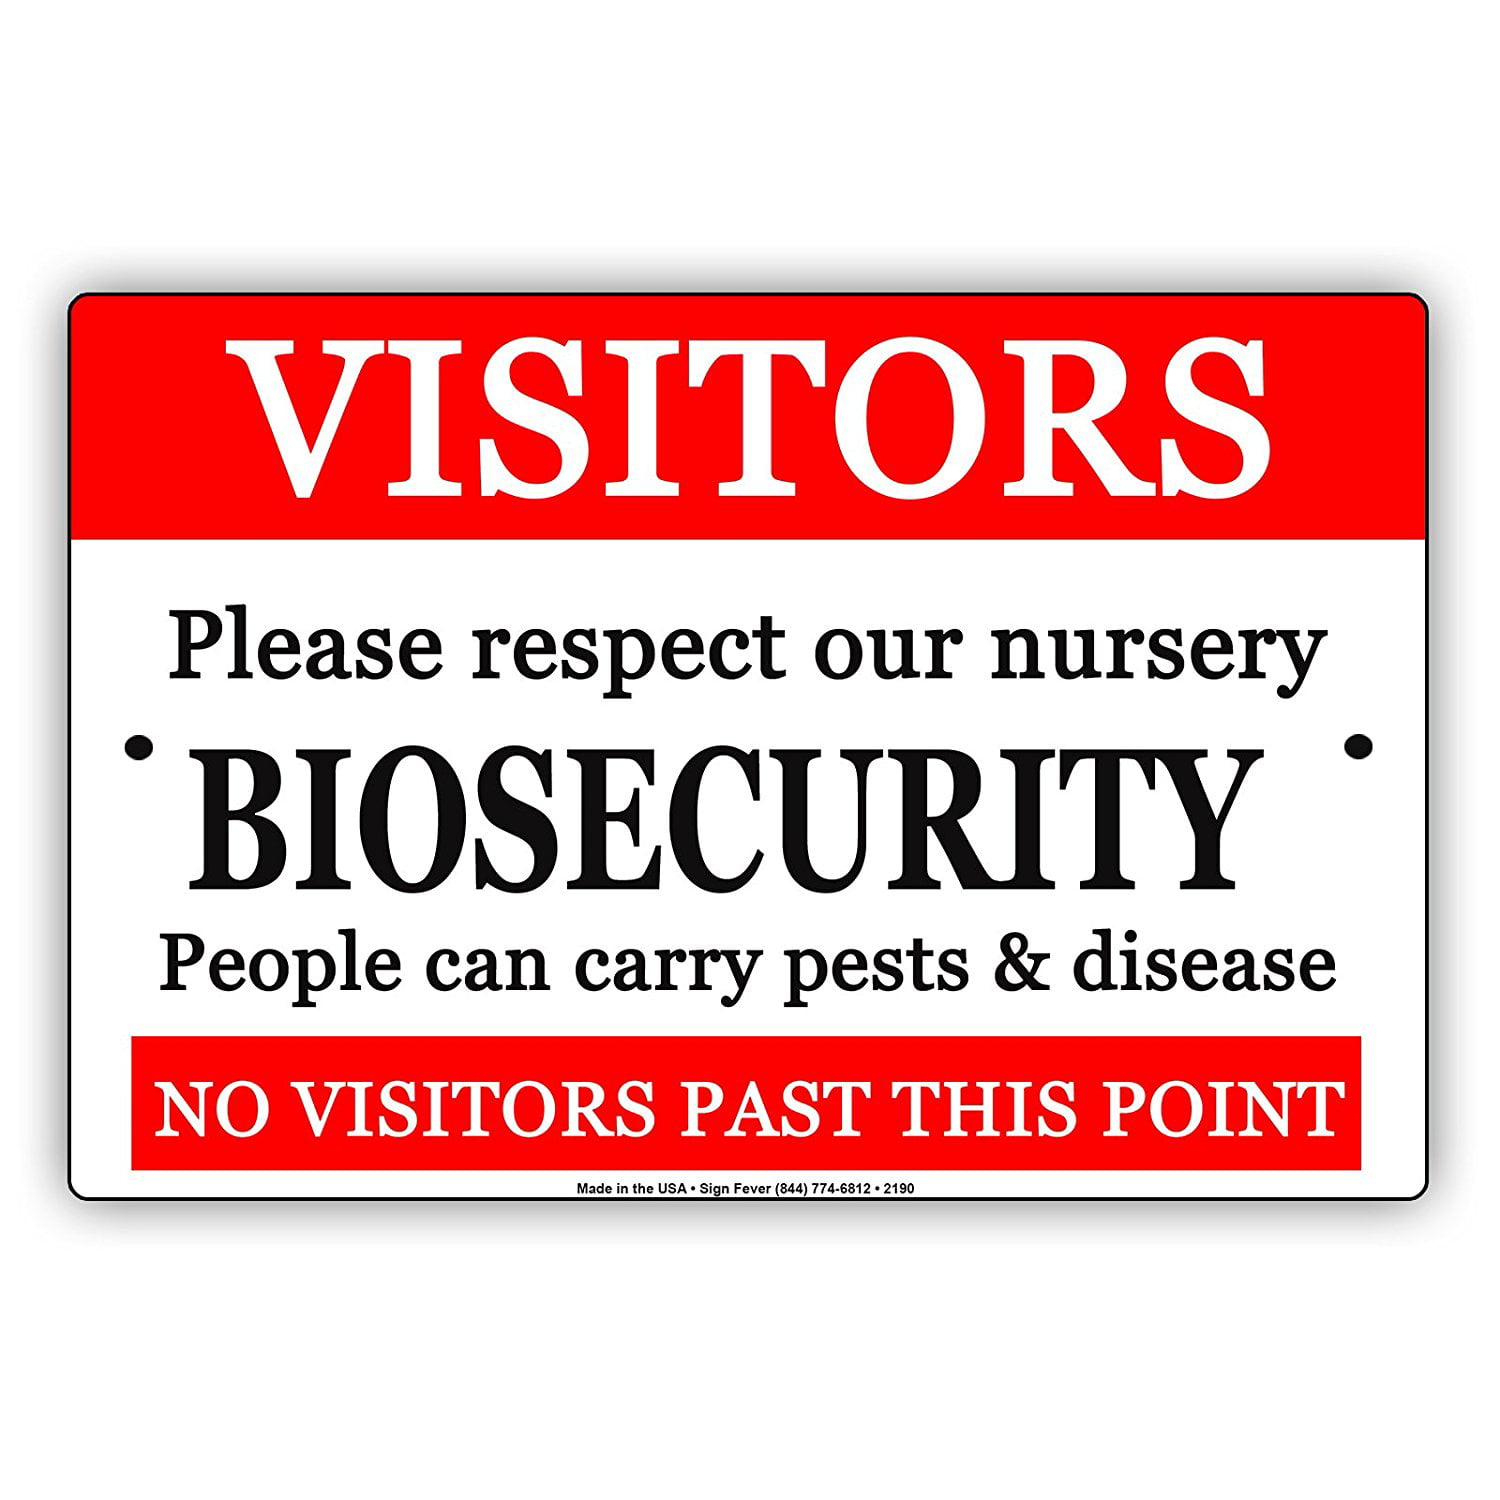 VISITORS FARM BIOSECURITY SAFETY SIGN VARIOUS SIZES SIGN & STICKER OPTIONS 